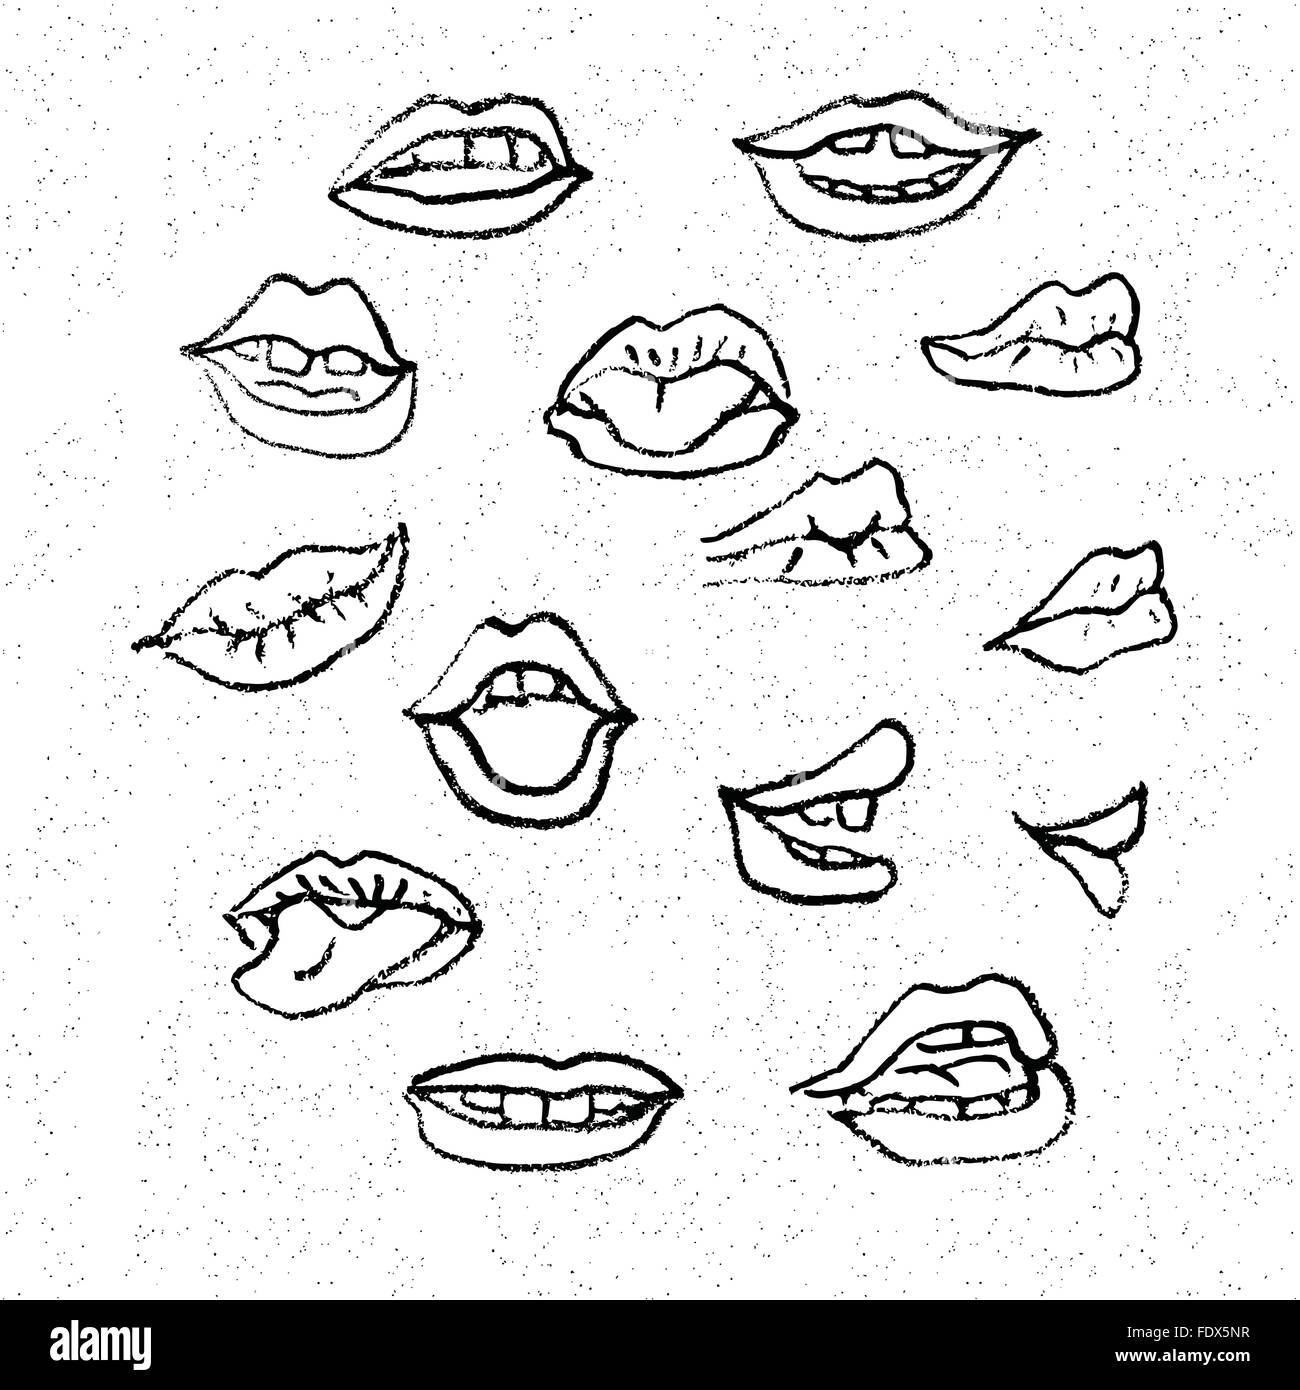 Lips set, attractive human mouths. Cartoon mouth icons. Every mouth represents a different style and emotion. Stock Vector